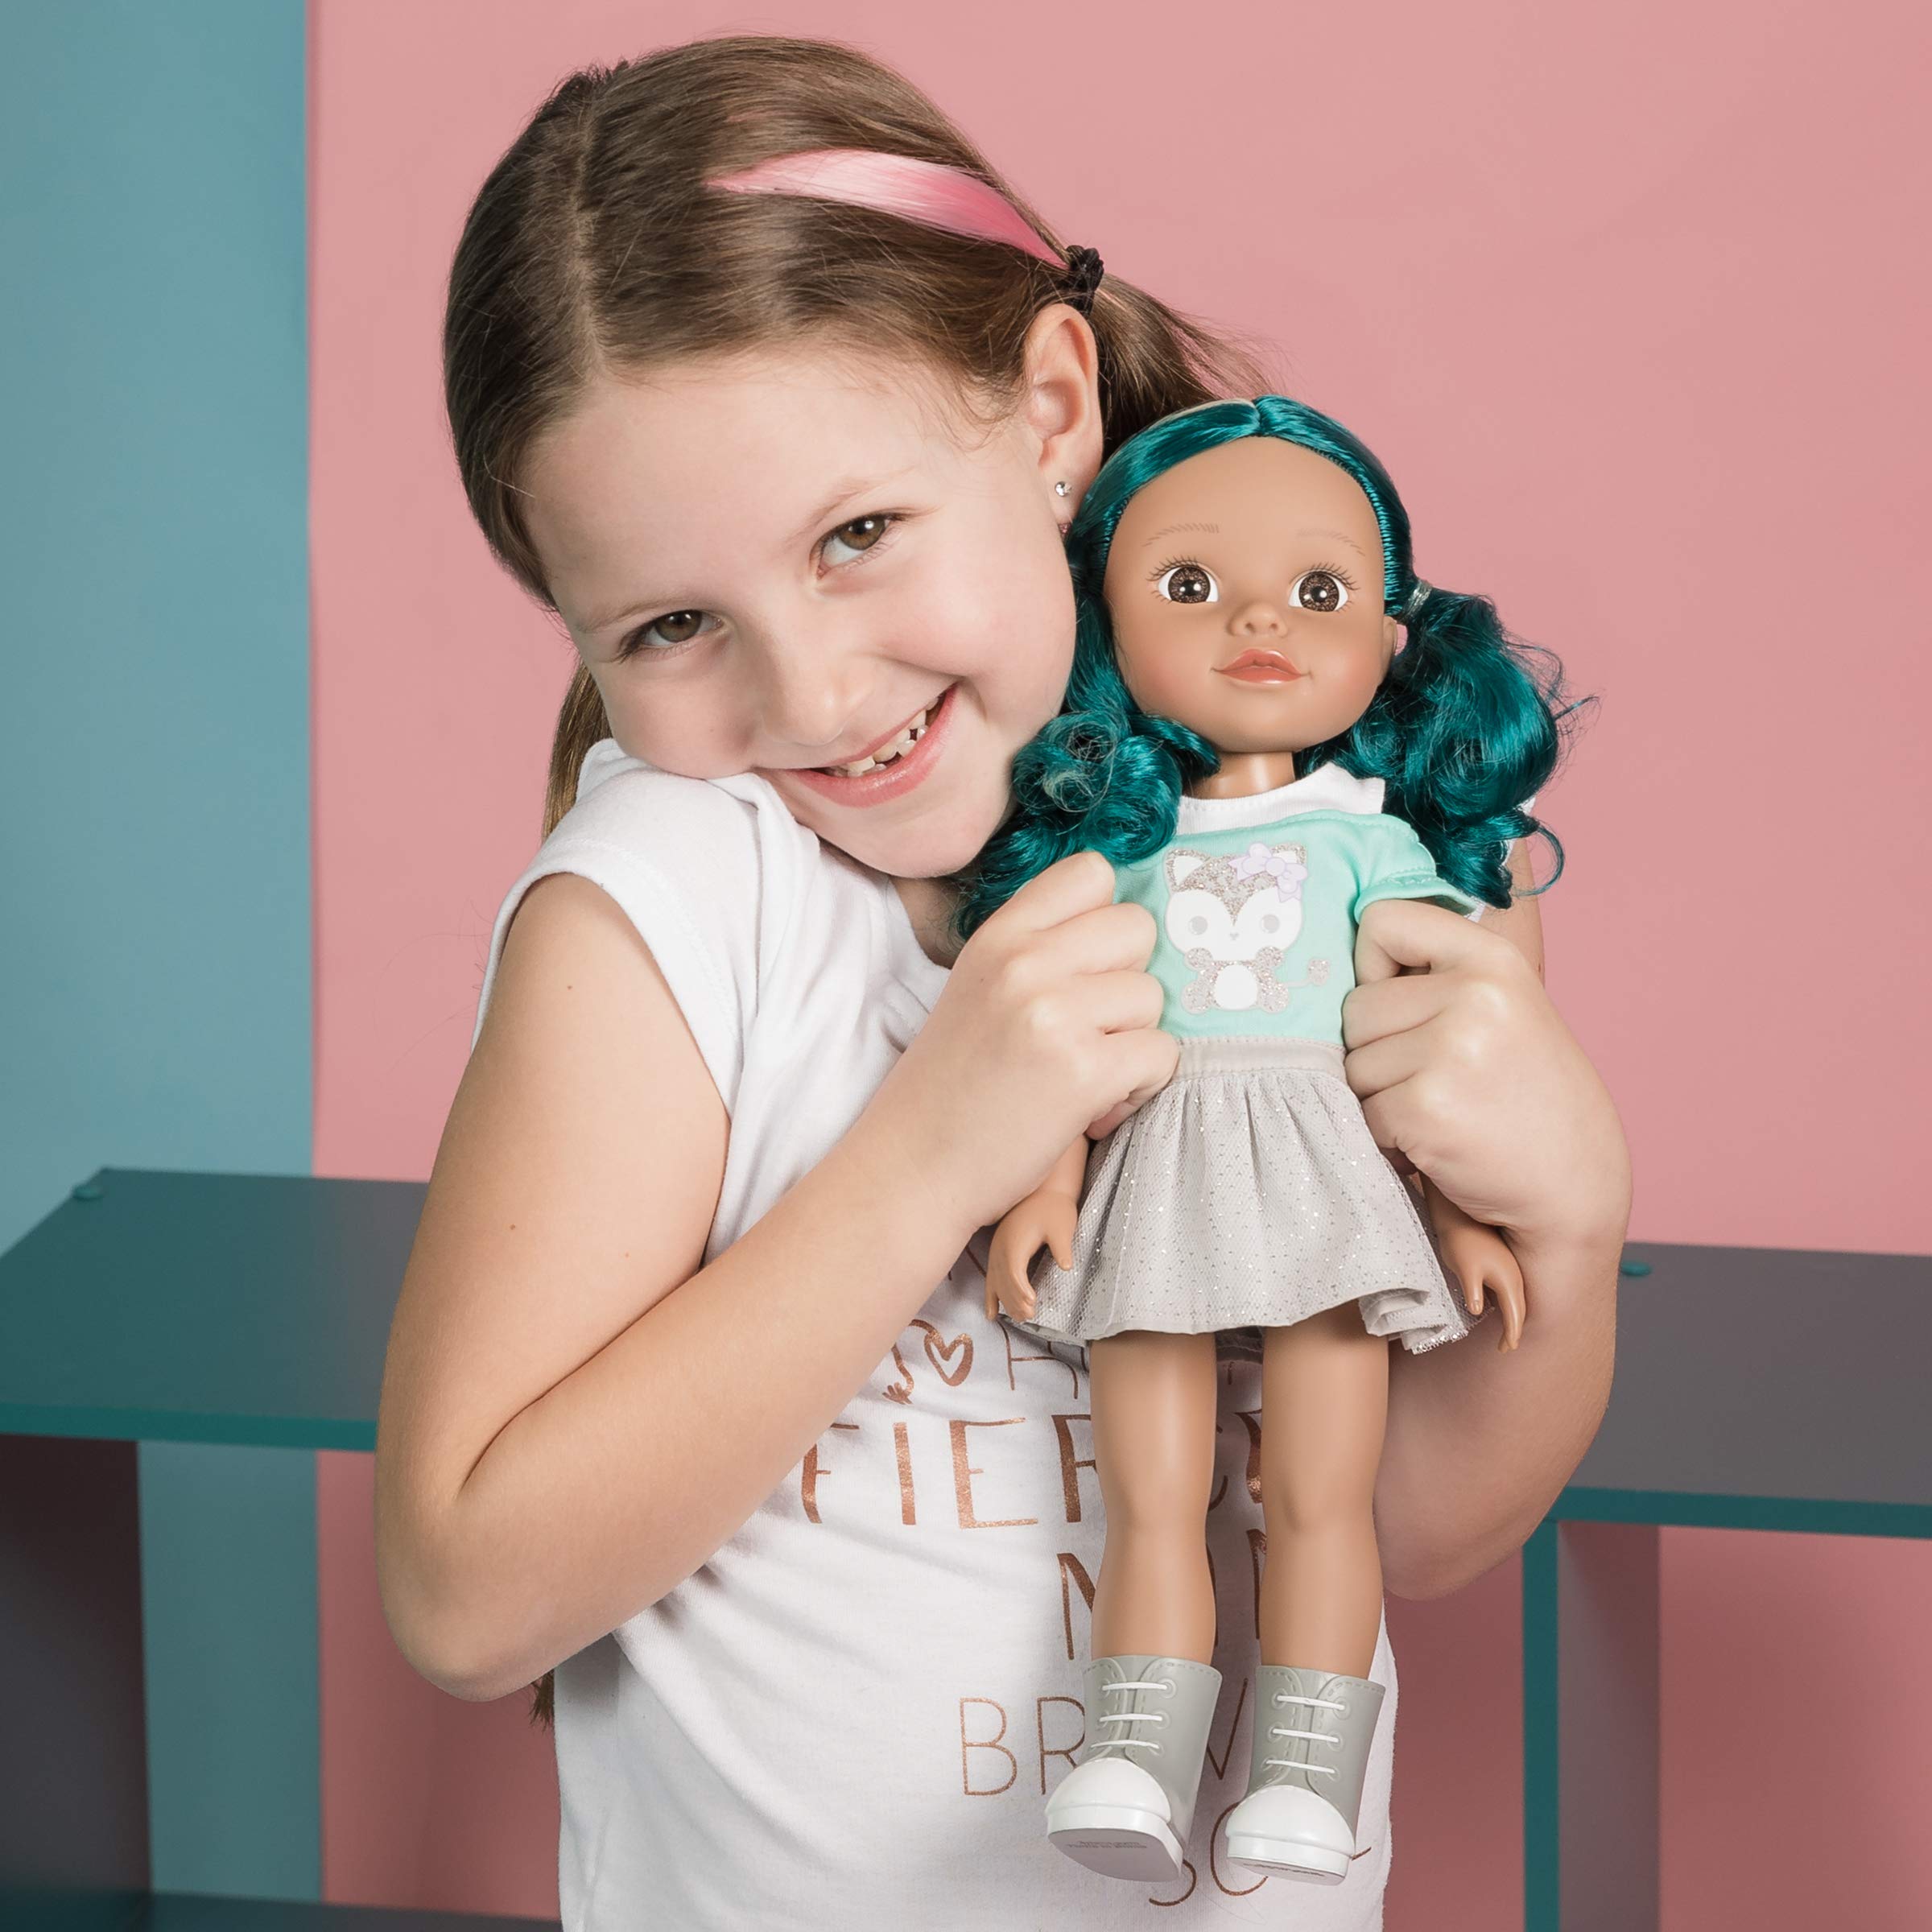 Adora 14 inch Doll Be Bright Doll Alma - Wolf, Hair Color Changes in The Sun, for Kids Age 3+